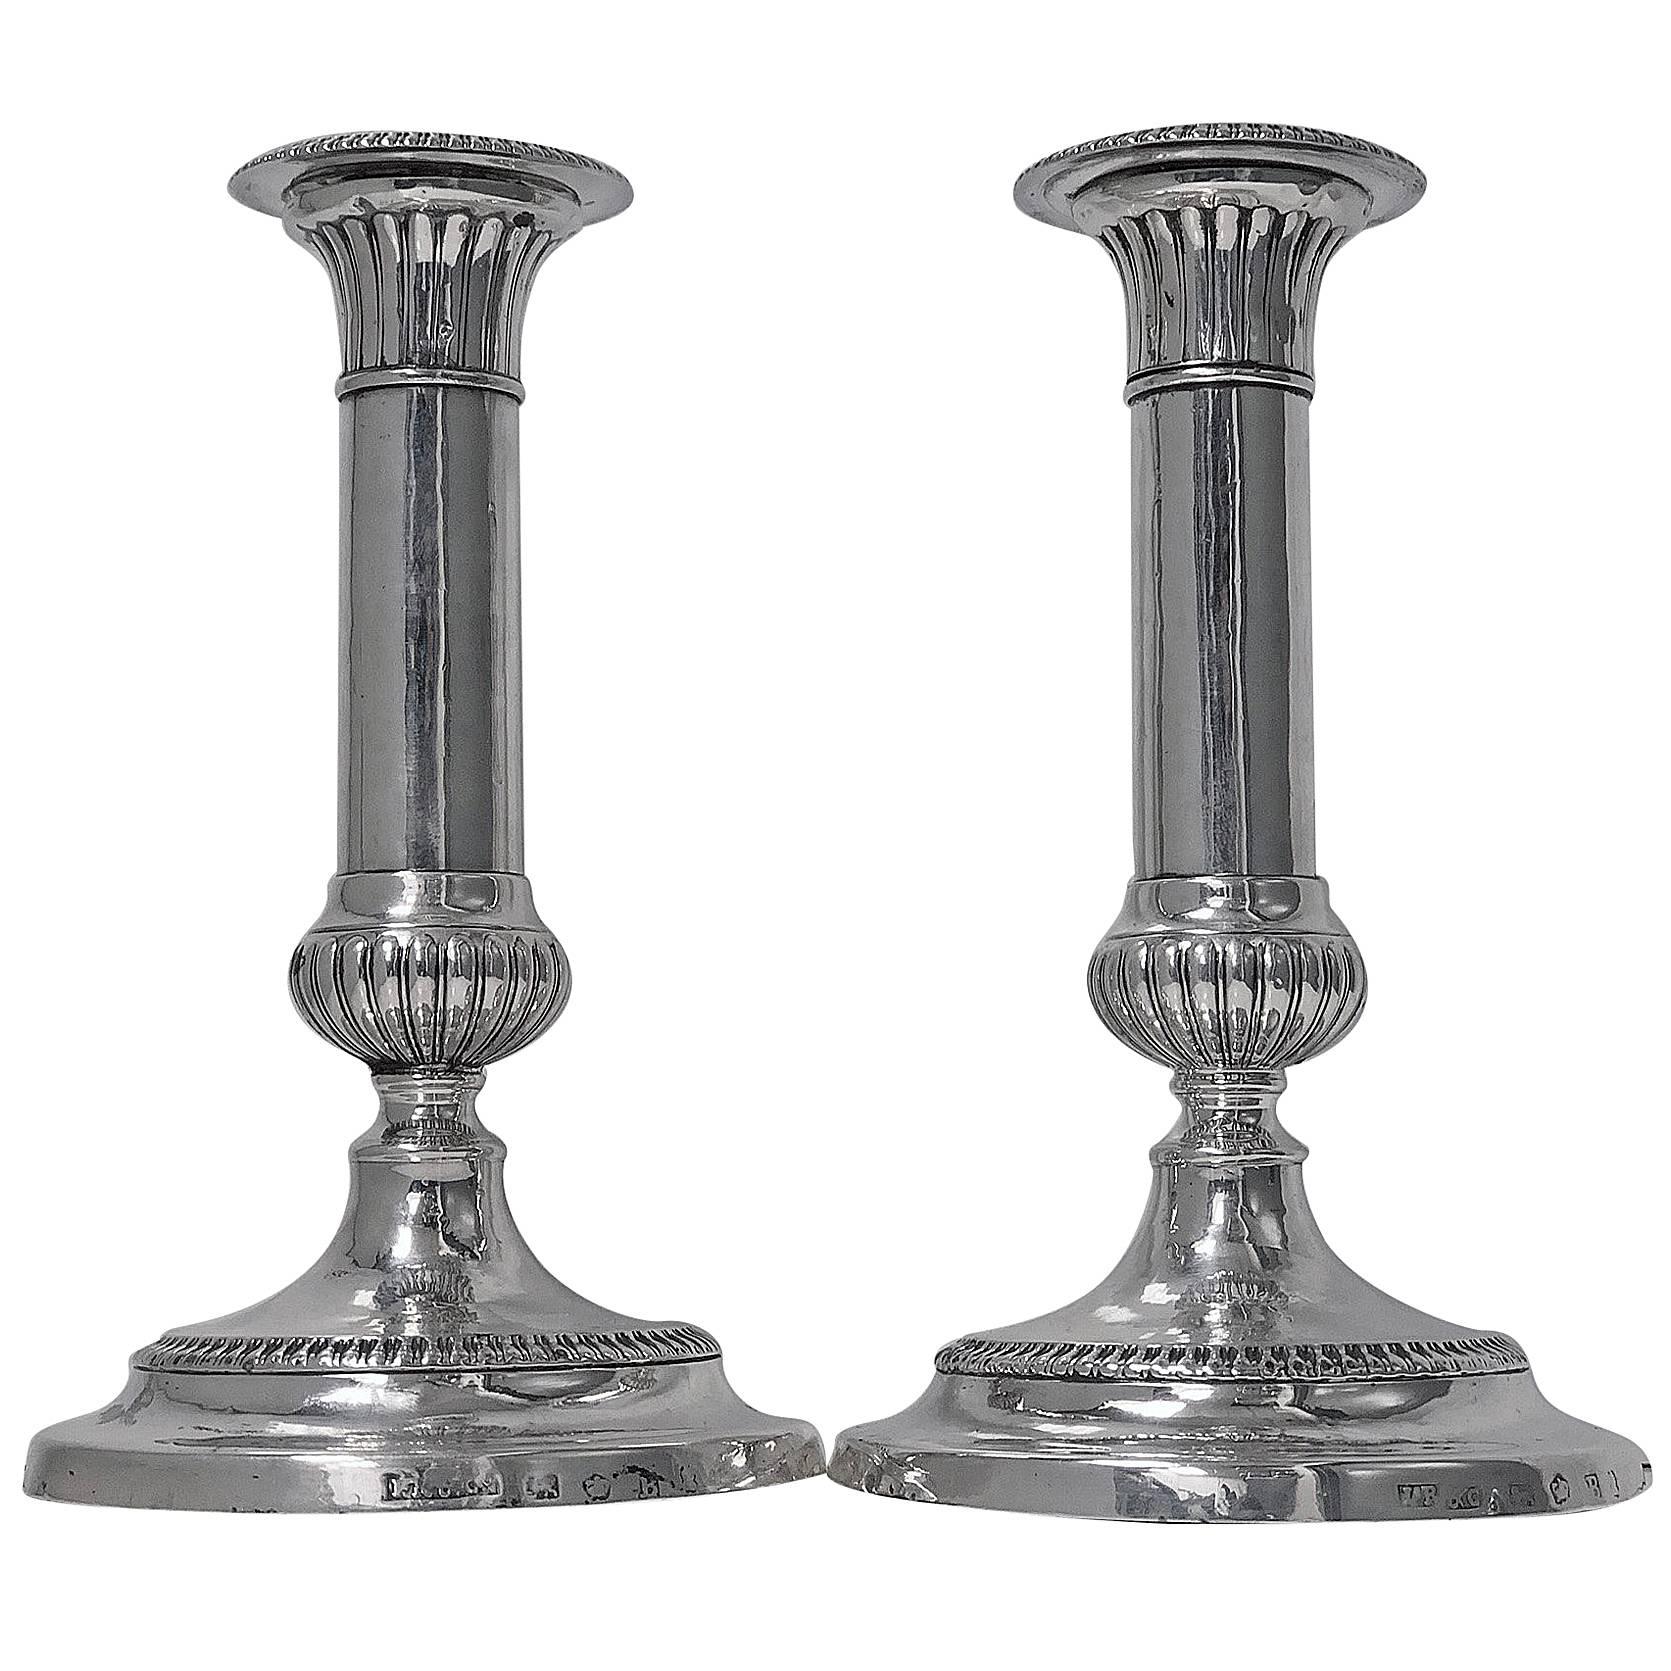 Georgian Sterling Silver Small Size Candlesticks, 1805 by John Roberts & Co